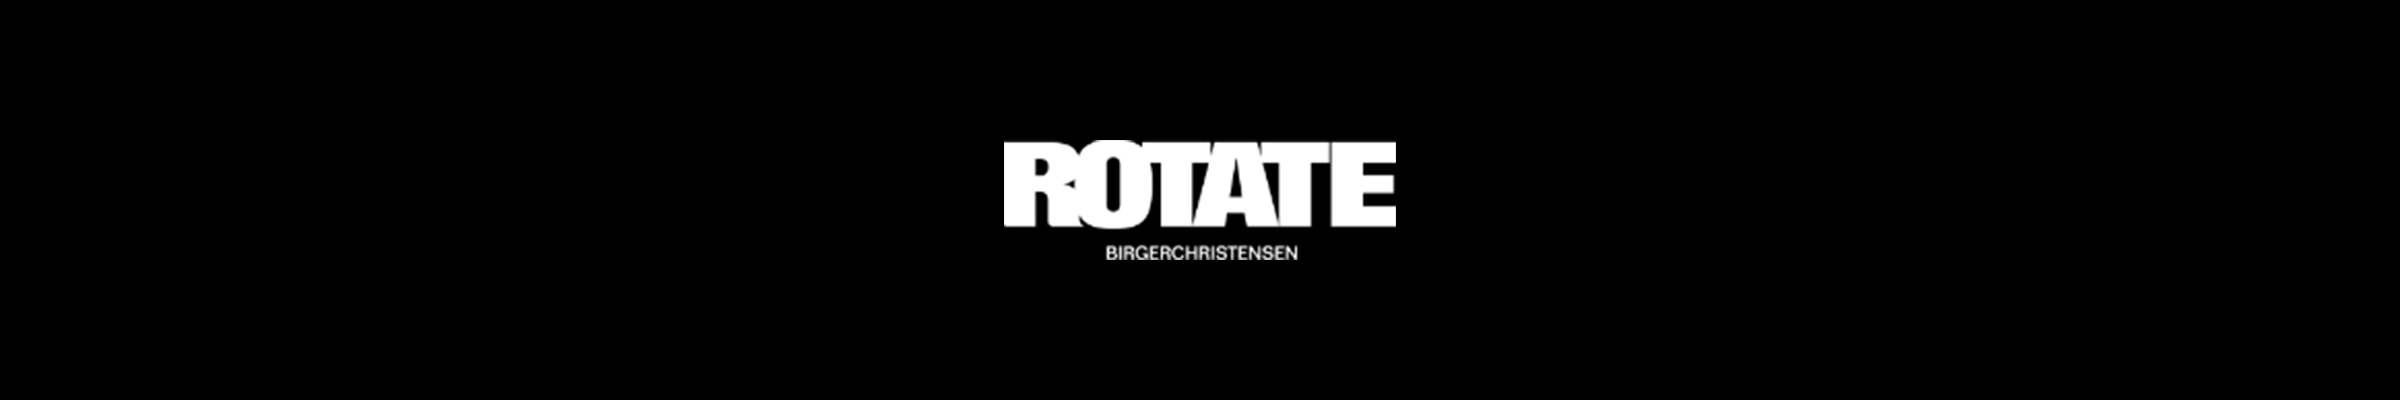 rotate-banner